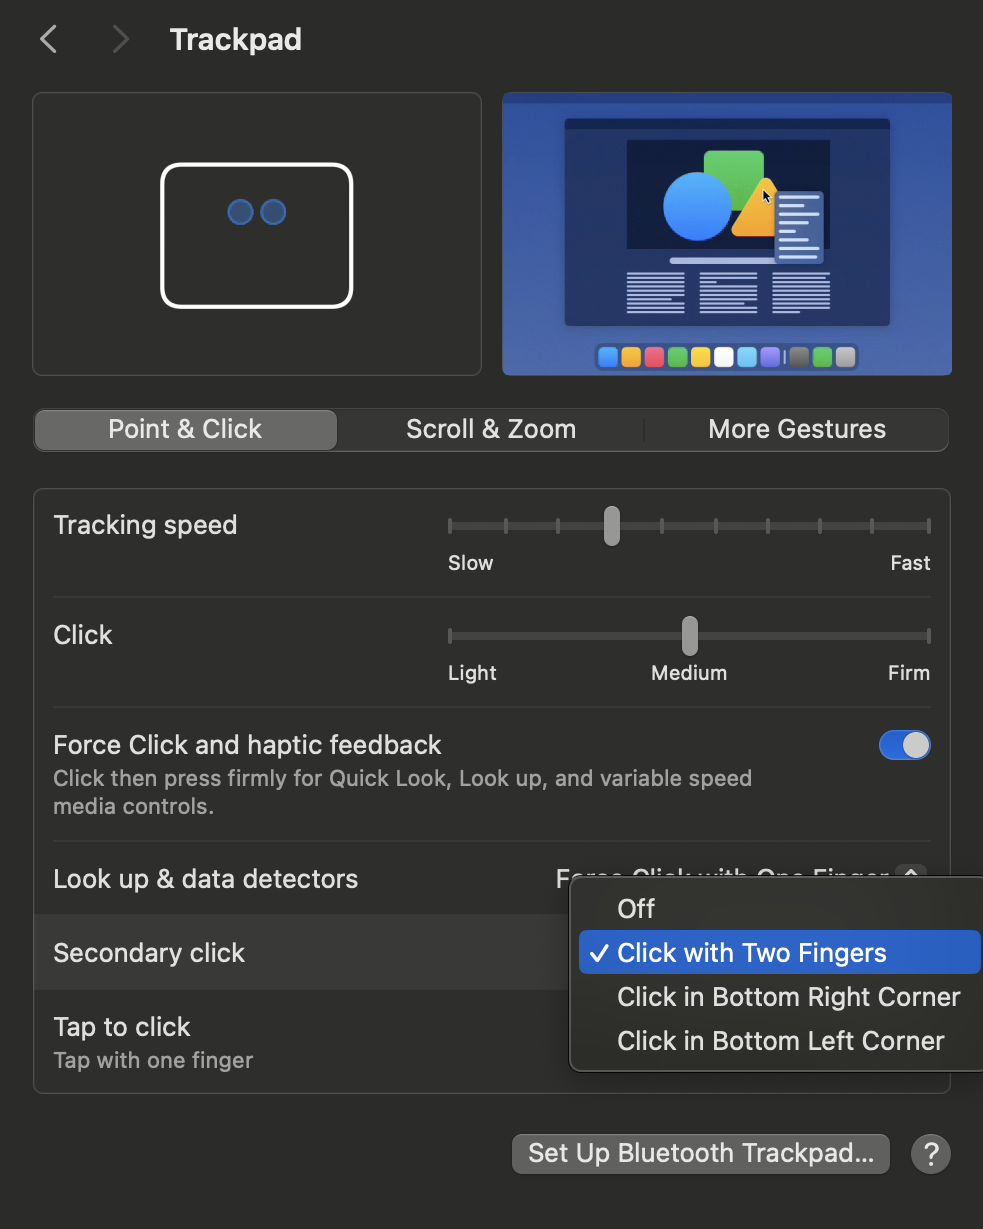 Trackpad menu with secondary click set to "Click with Two Fingers"